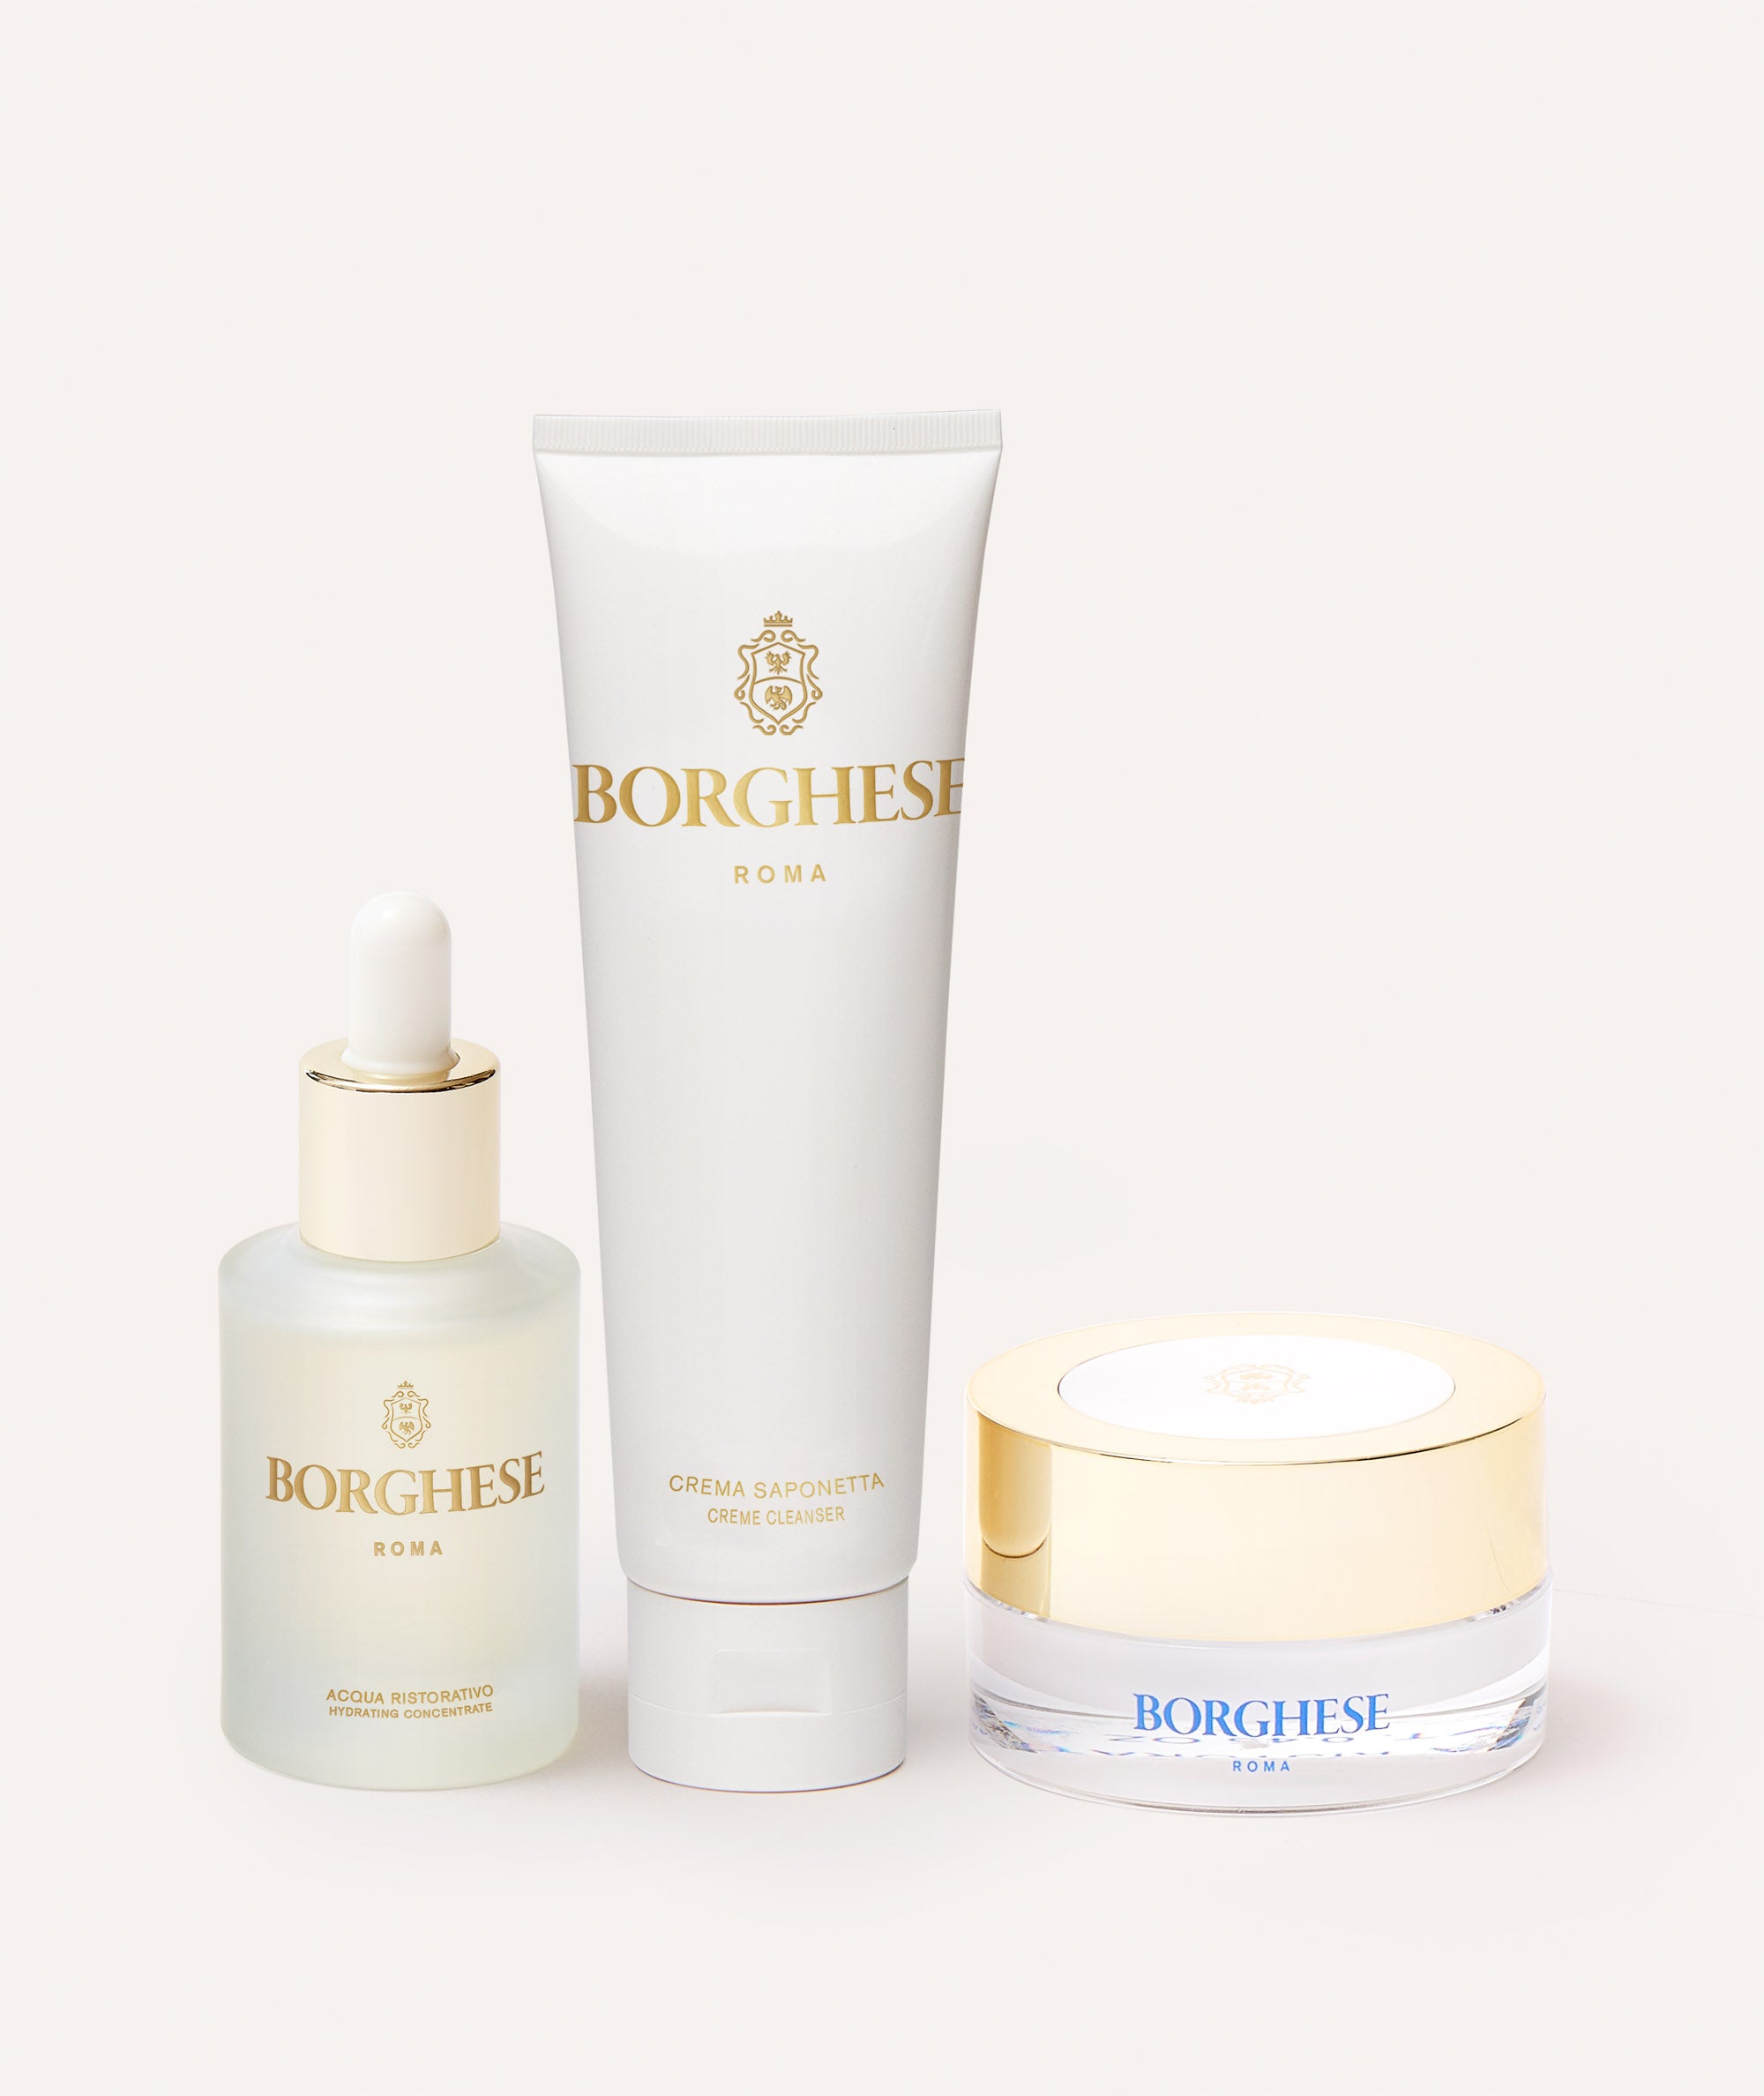 Picture of the Borghese 3-Step Skincare Regimen Gift Set contents